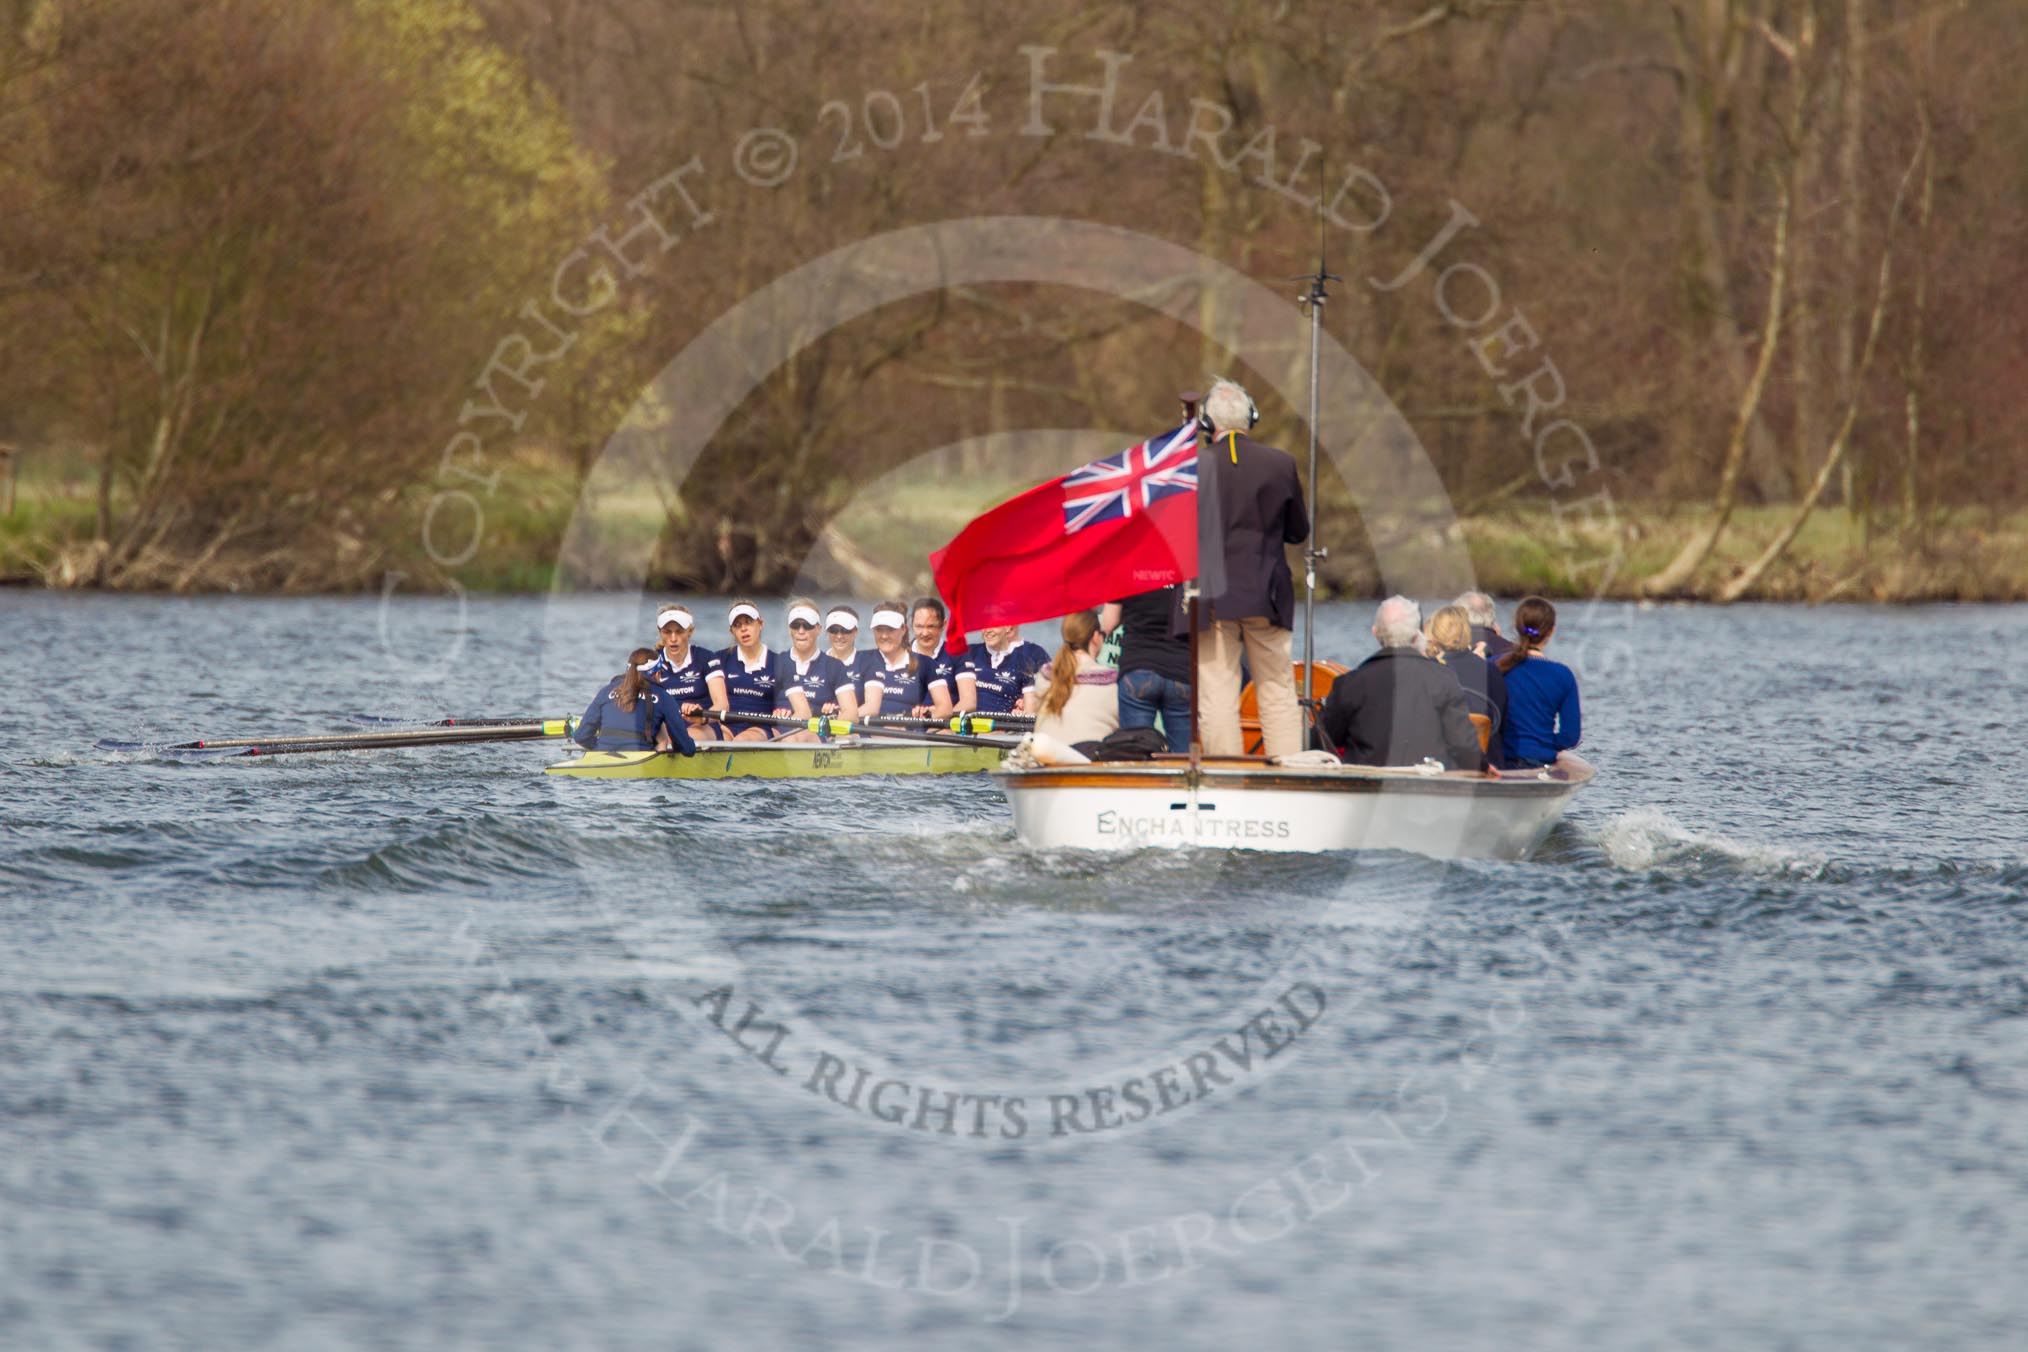 The Women's Boat Race and Henley Boat Races 2014: The Women's Reserves - Osiris v. Blondie race. Osiris (Oxford), in the lead, is followed by the press launch towards the finish line..
River Thames,
Henley-on-Thames,
Buckinghamshire,
United Kingdom,
on 30 March 2014 at 14:17, image #176